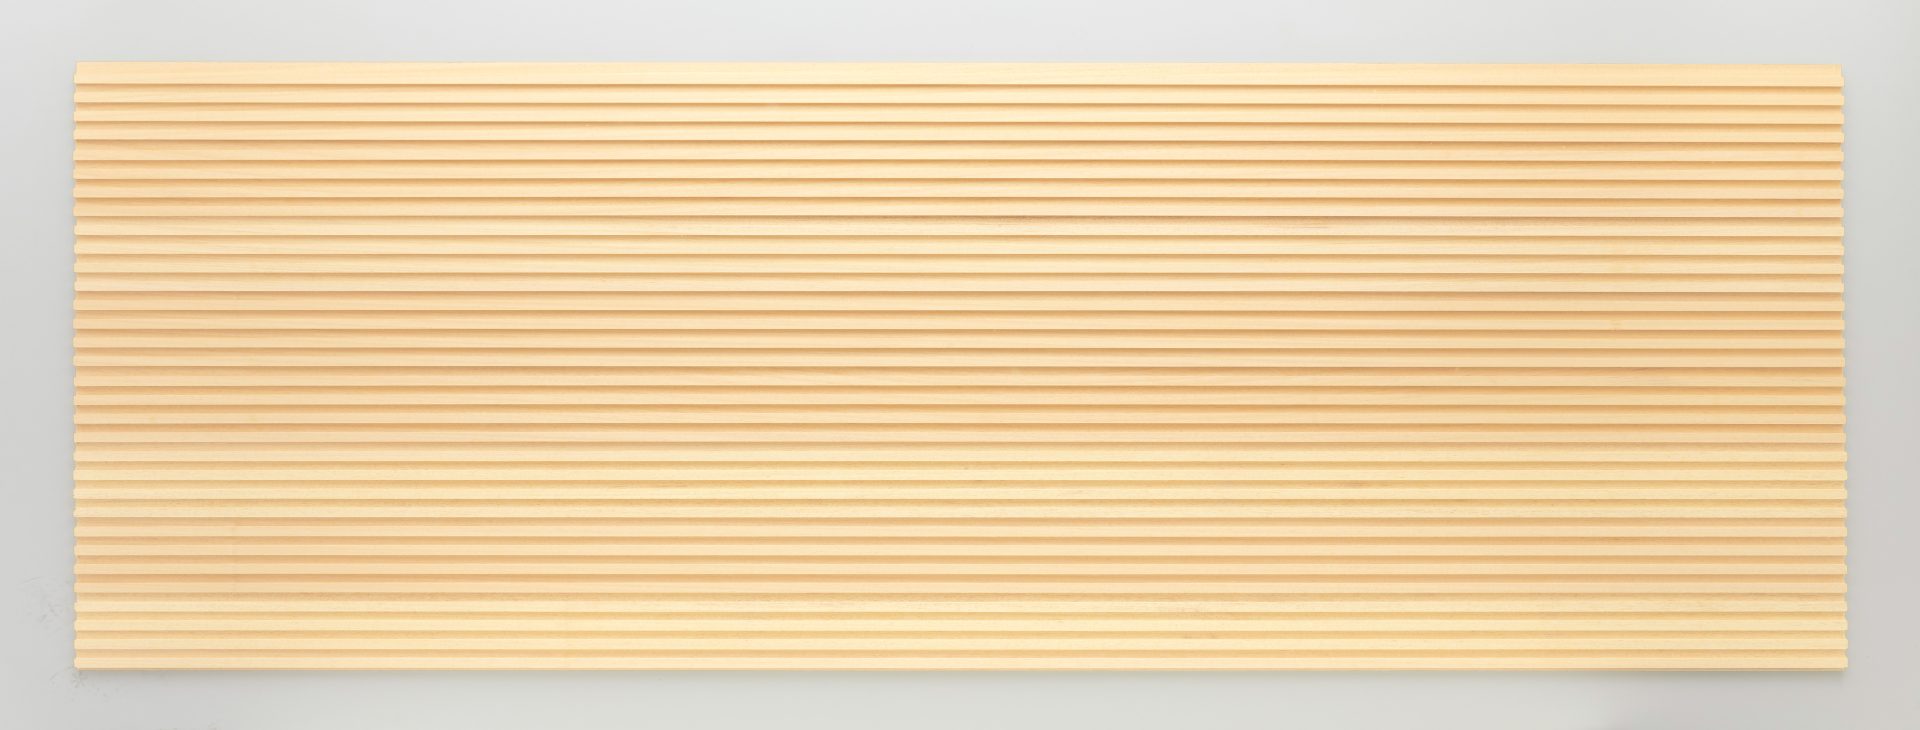 PANELING STANDARD アユース リブ パネリング 無塗装品